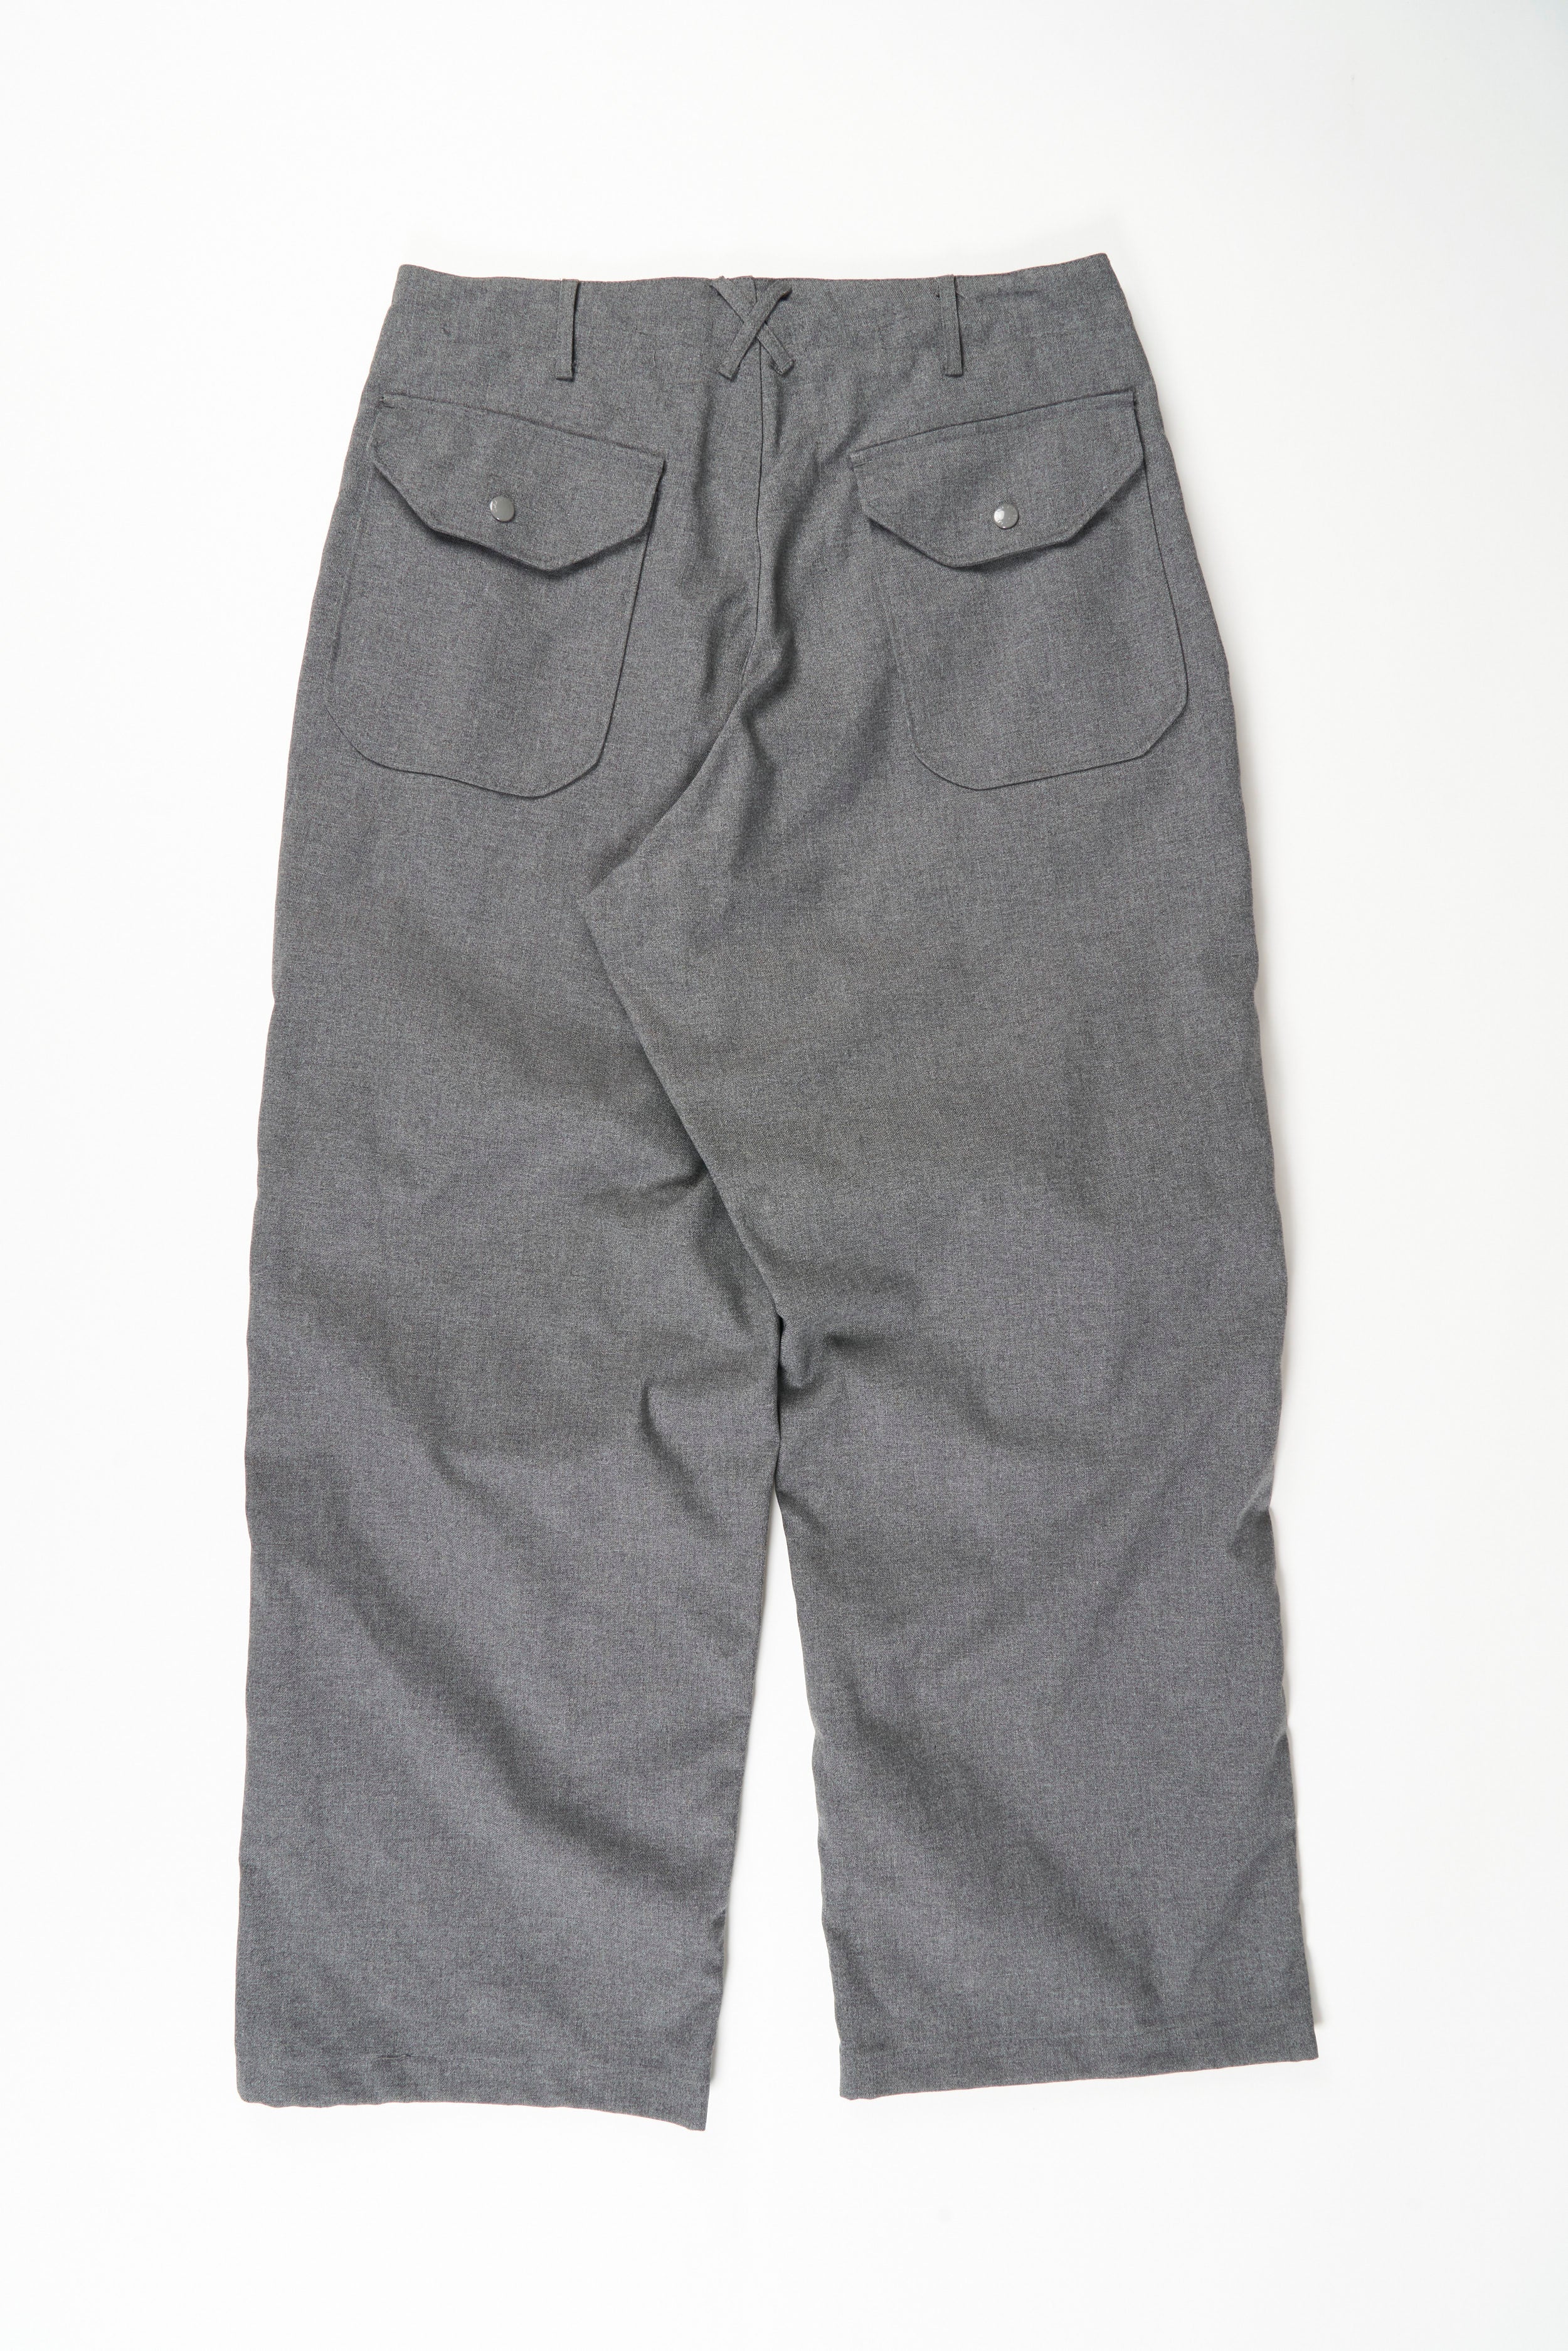 Over Pant - Grey PC Hopsack